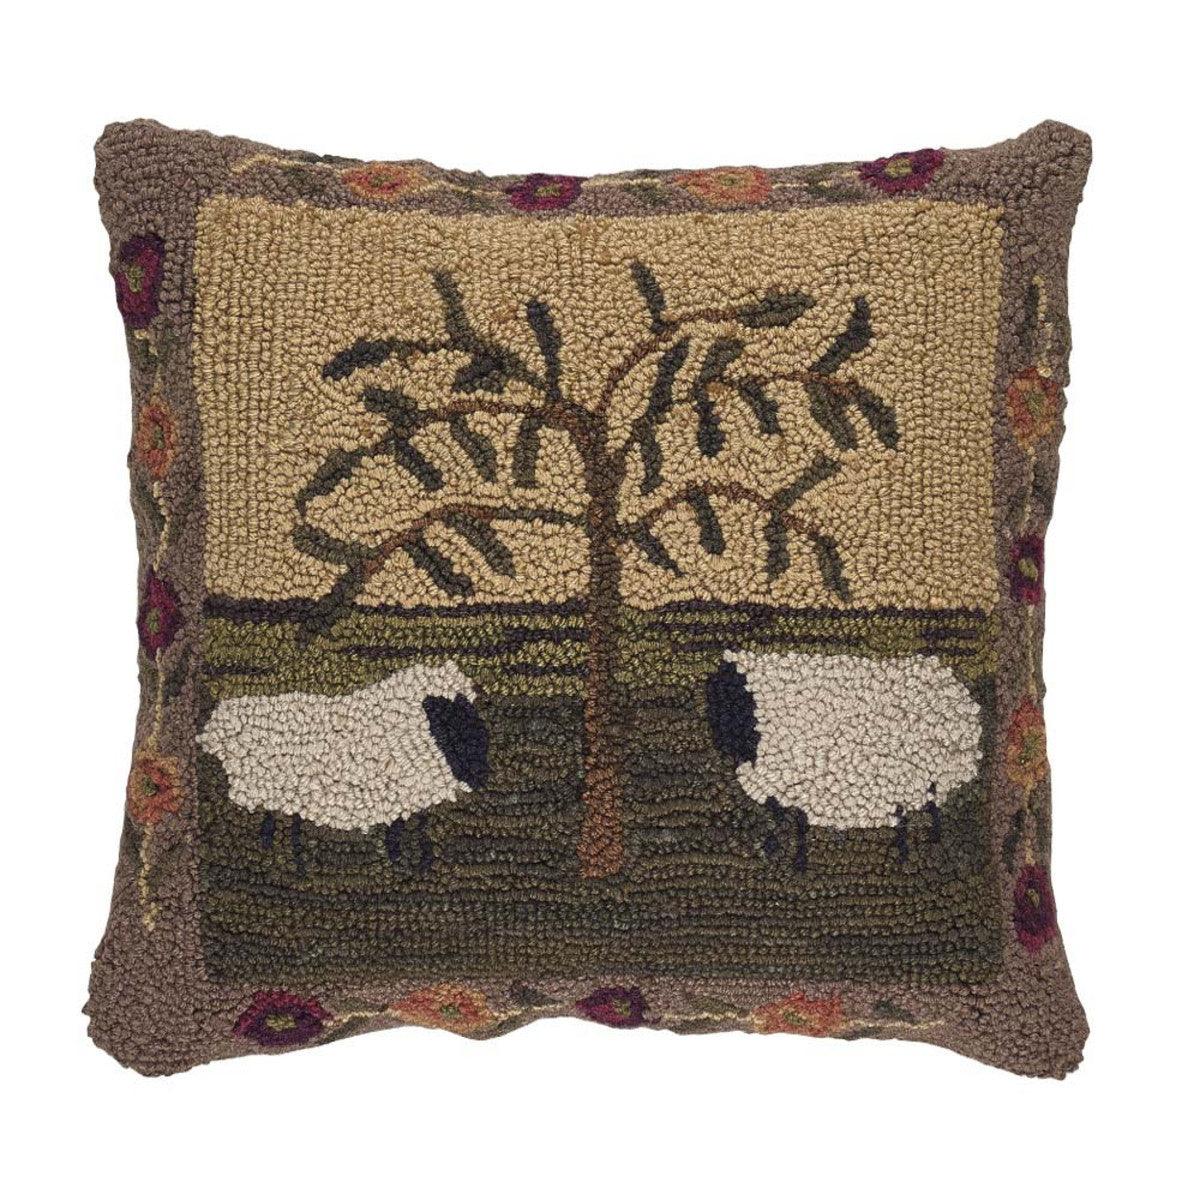 Willow & Sheep Hooked Pillow Set Polyester Fill 18"x18" - Park Designs - The Fox Decor